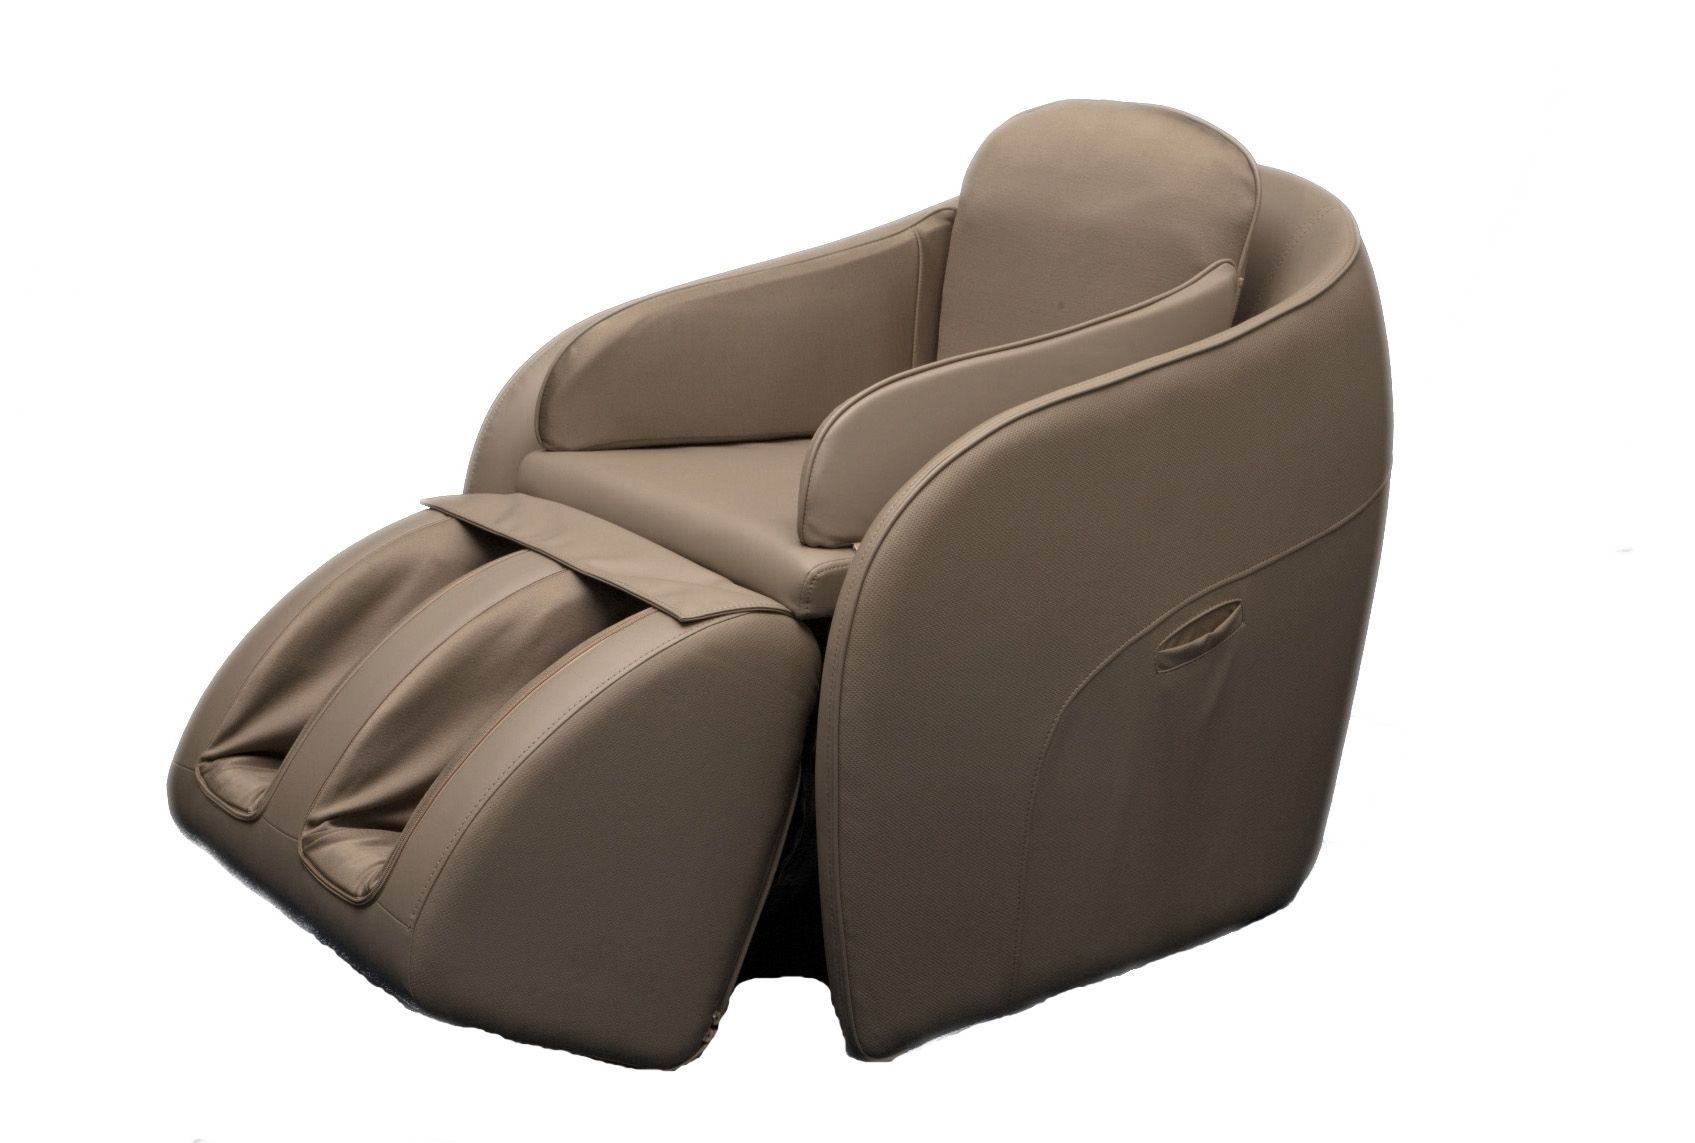 Modern Concept Foot Massage Chairs With Portable Foot Massage Sofa Throughout Foot Massage Sofas (View 6 of 10)